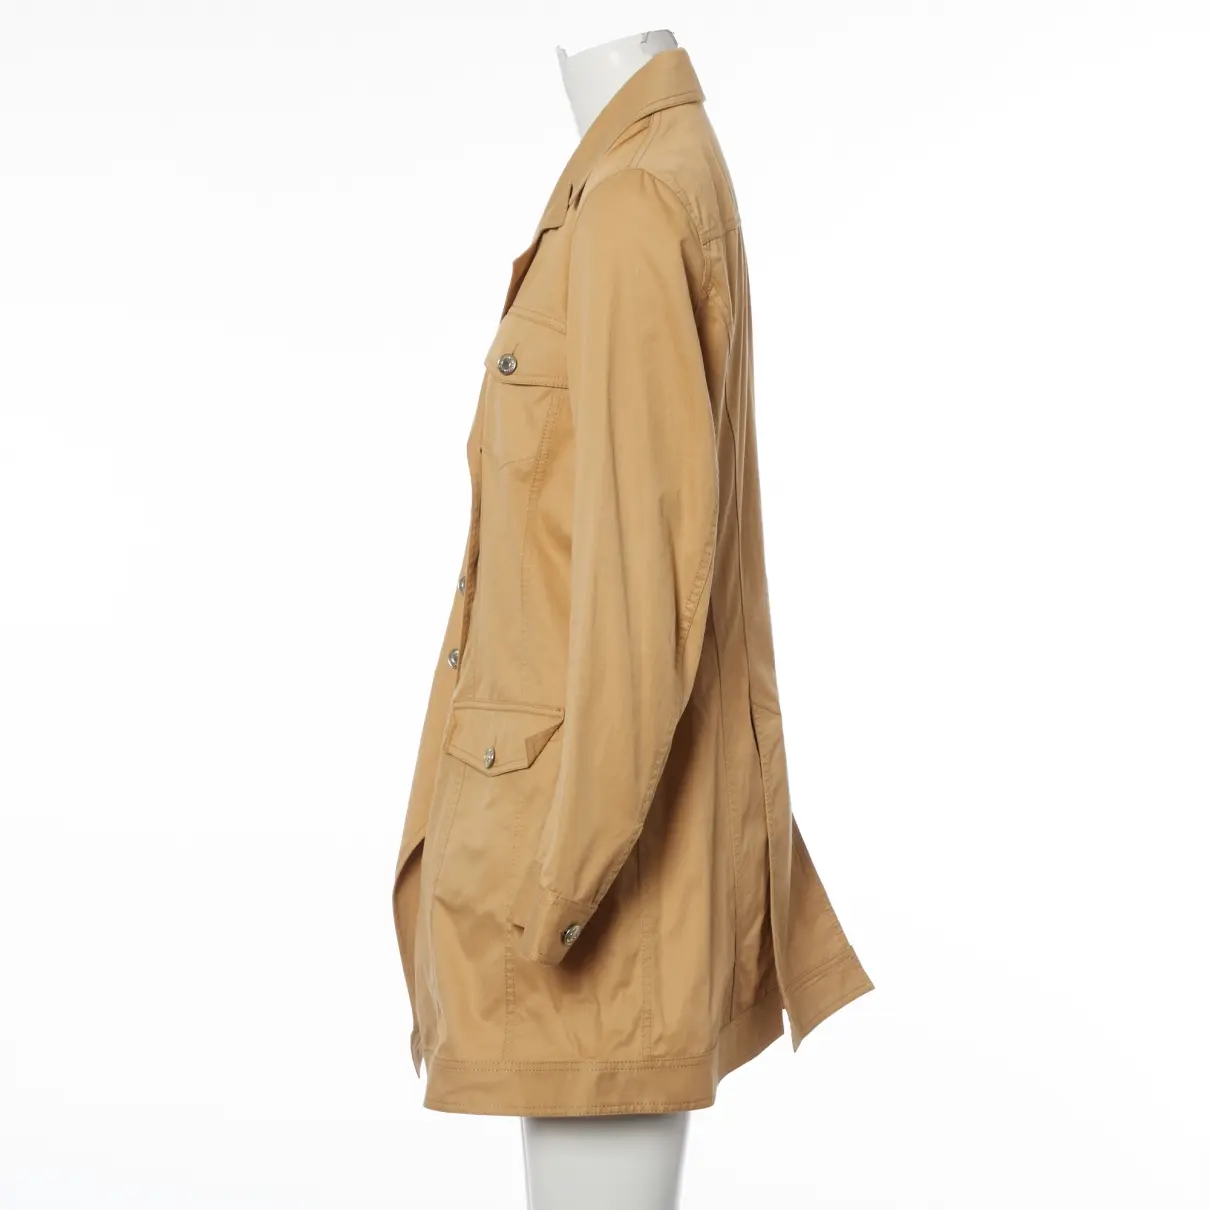 John Galliano Trench coat for sale - Vintage